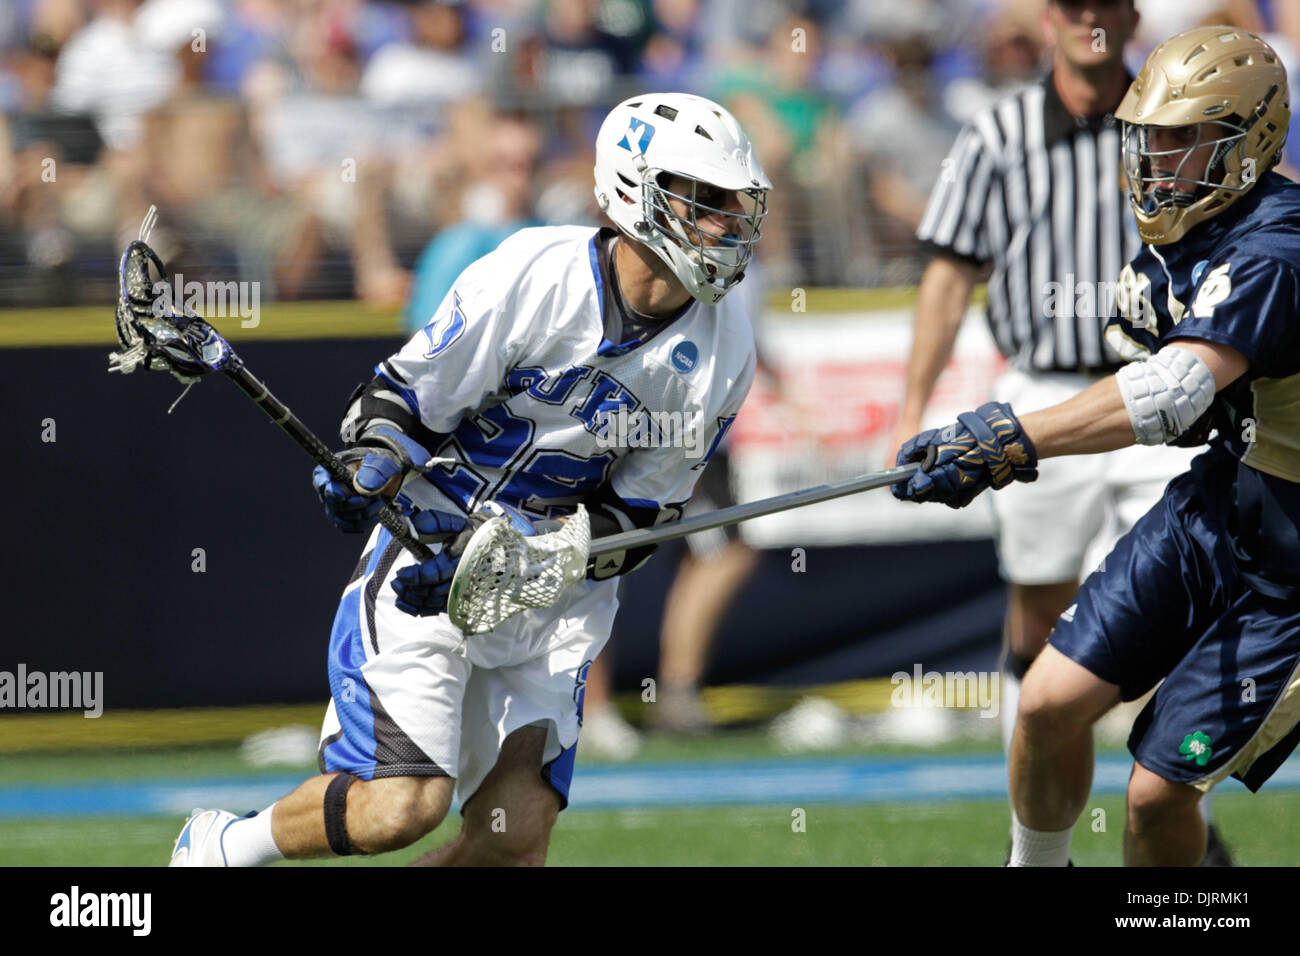 May 31, 2010 - Baltimore, Maryland, U.S - 31 May 2010:   Duke  Attackman Ned Crotty (22) in action during the Division I Men's Lacrosse Championship finals  held at M&T Bank Stadium in Baltimore, Maryland.  At the half, Duke leads Notre Dame 3-2. (Credit Image: © Alex Cena/Southcreek Global/ZUMApress.com) Stock Photo